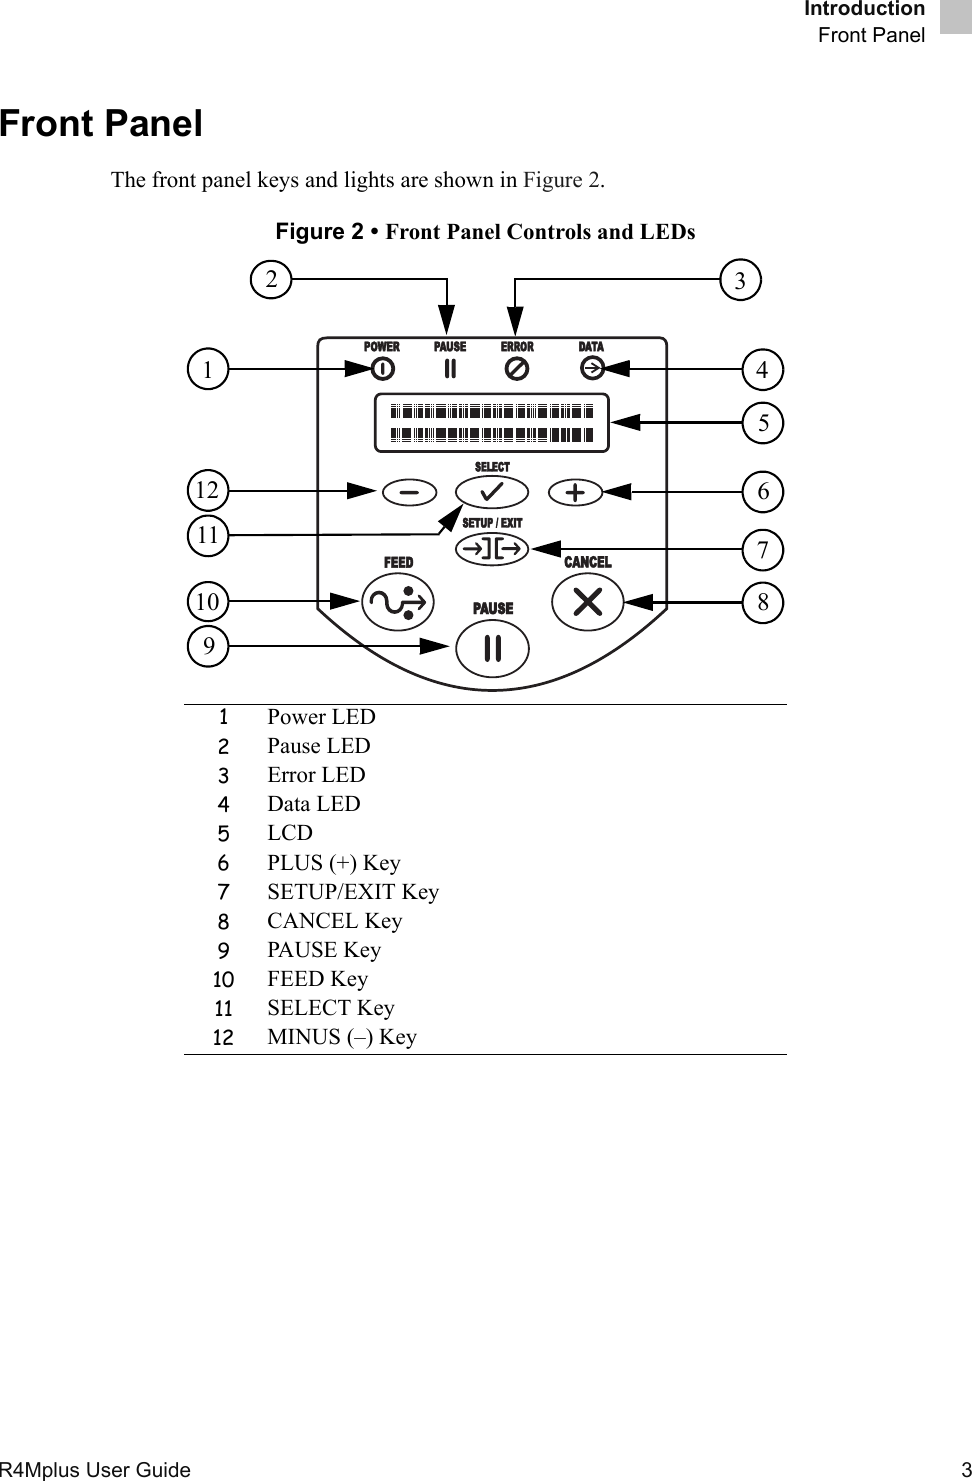 IntroductionFront PanelR4Mplus User Guide  3Front PanelThe front panel keys and lights are shown in Figure 2.Figure 2 • Front Panel Controls and LEDs1Power LED2Pause LED3Error LED4Data LED5LCD6PLUS (+) Key7SETUP/EXIT Key8CANCEL Key9PAUSE Key10 FEED Key11 SELECT Key12 MINUS (–) KeyPAUSE234567819101112